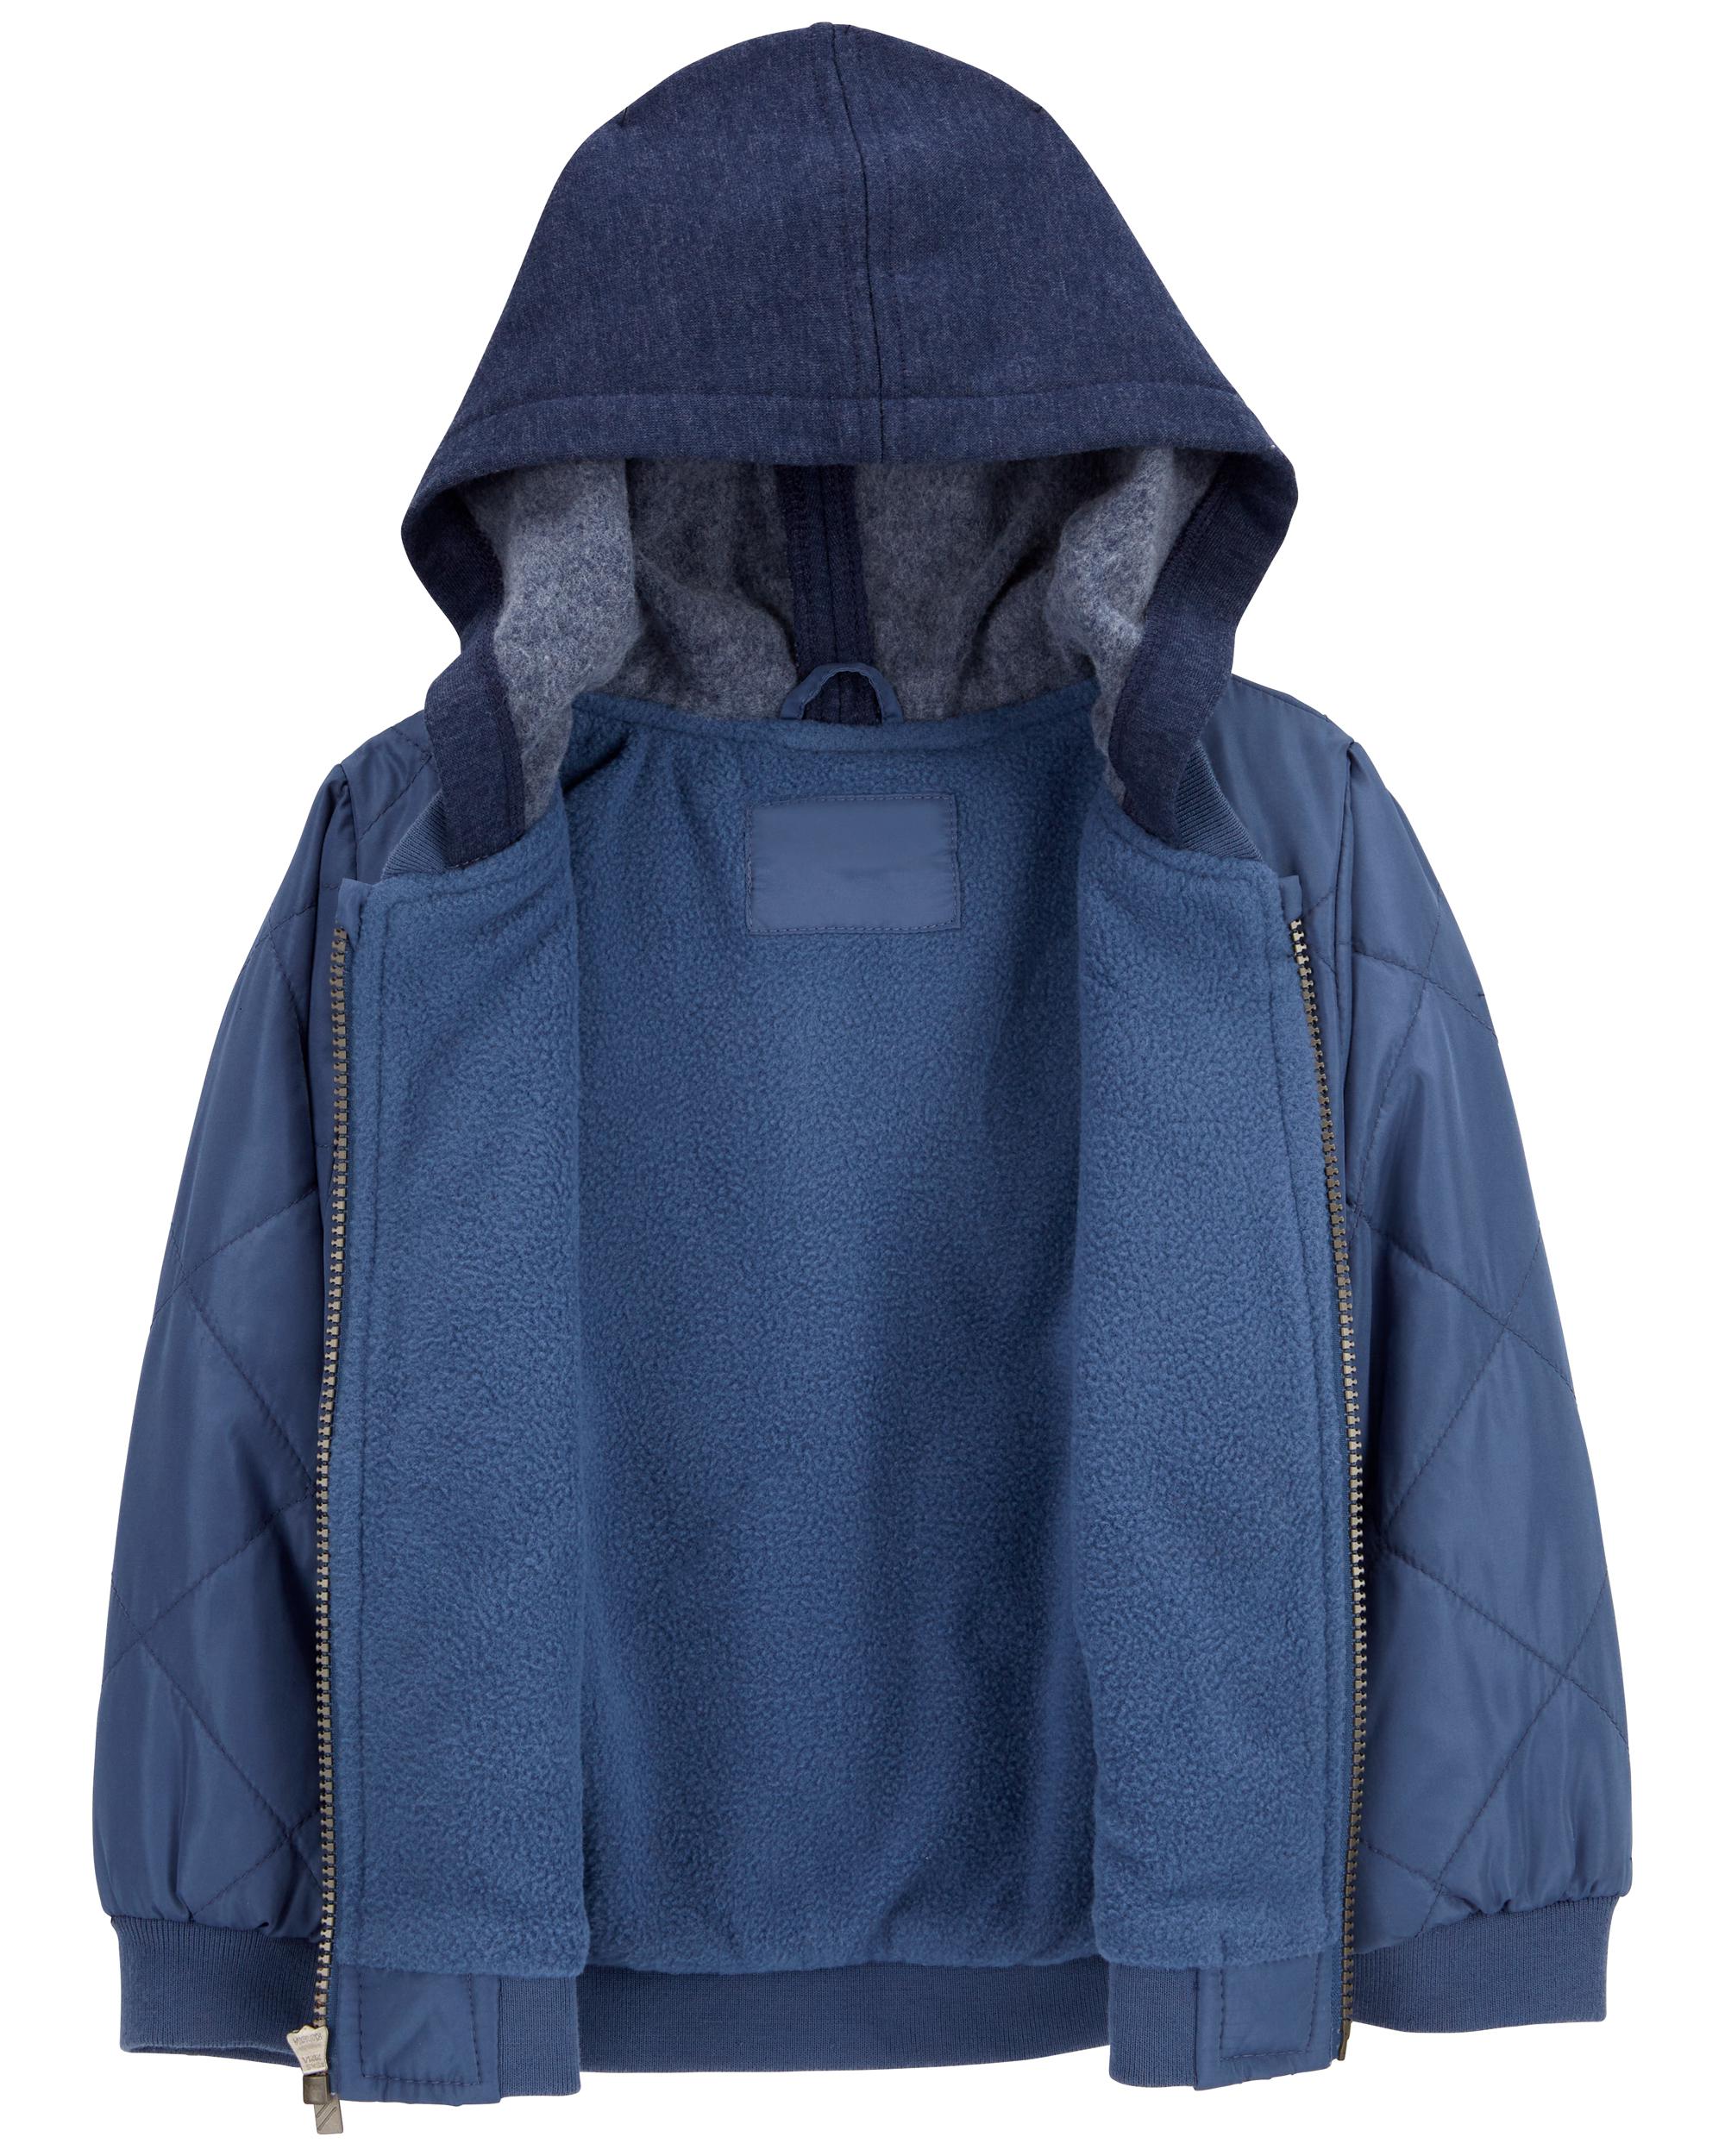 Kid Quilted Fleece Lined Jacket